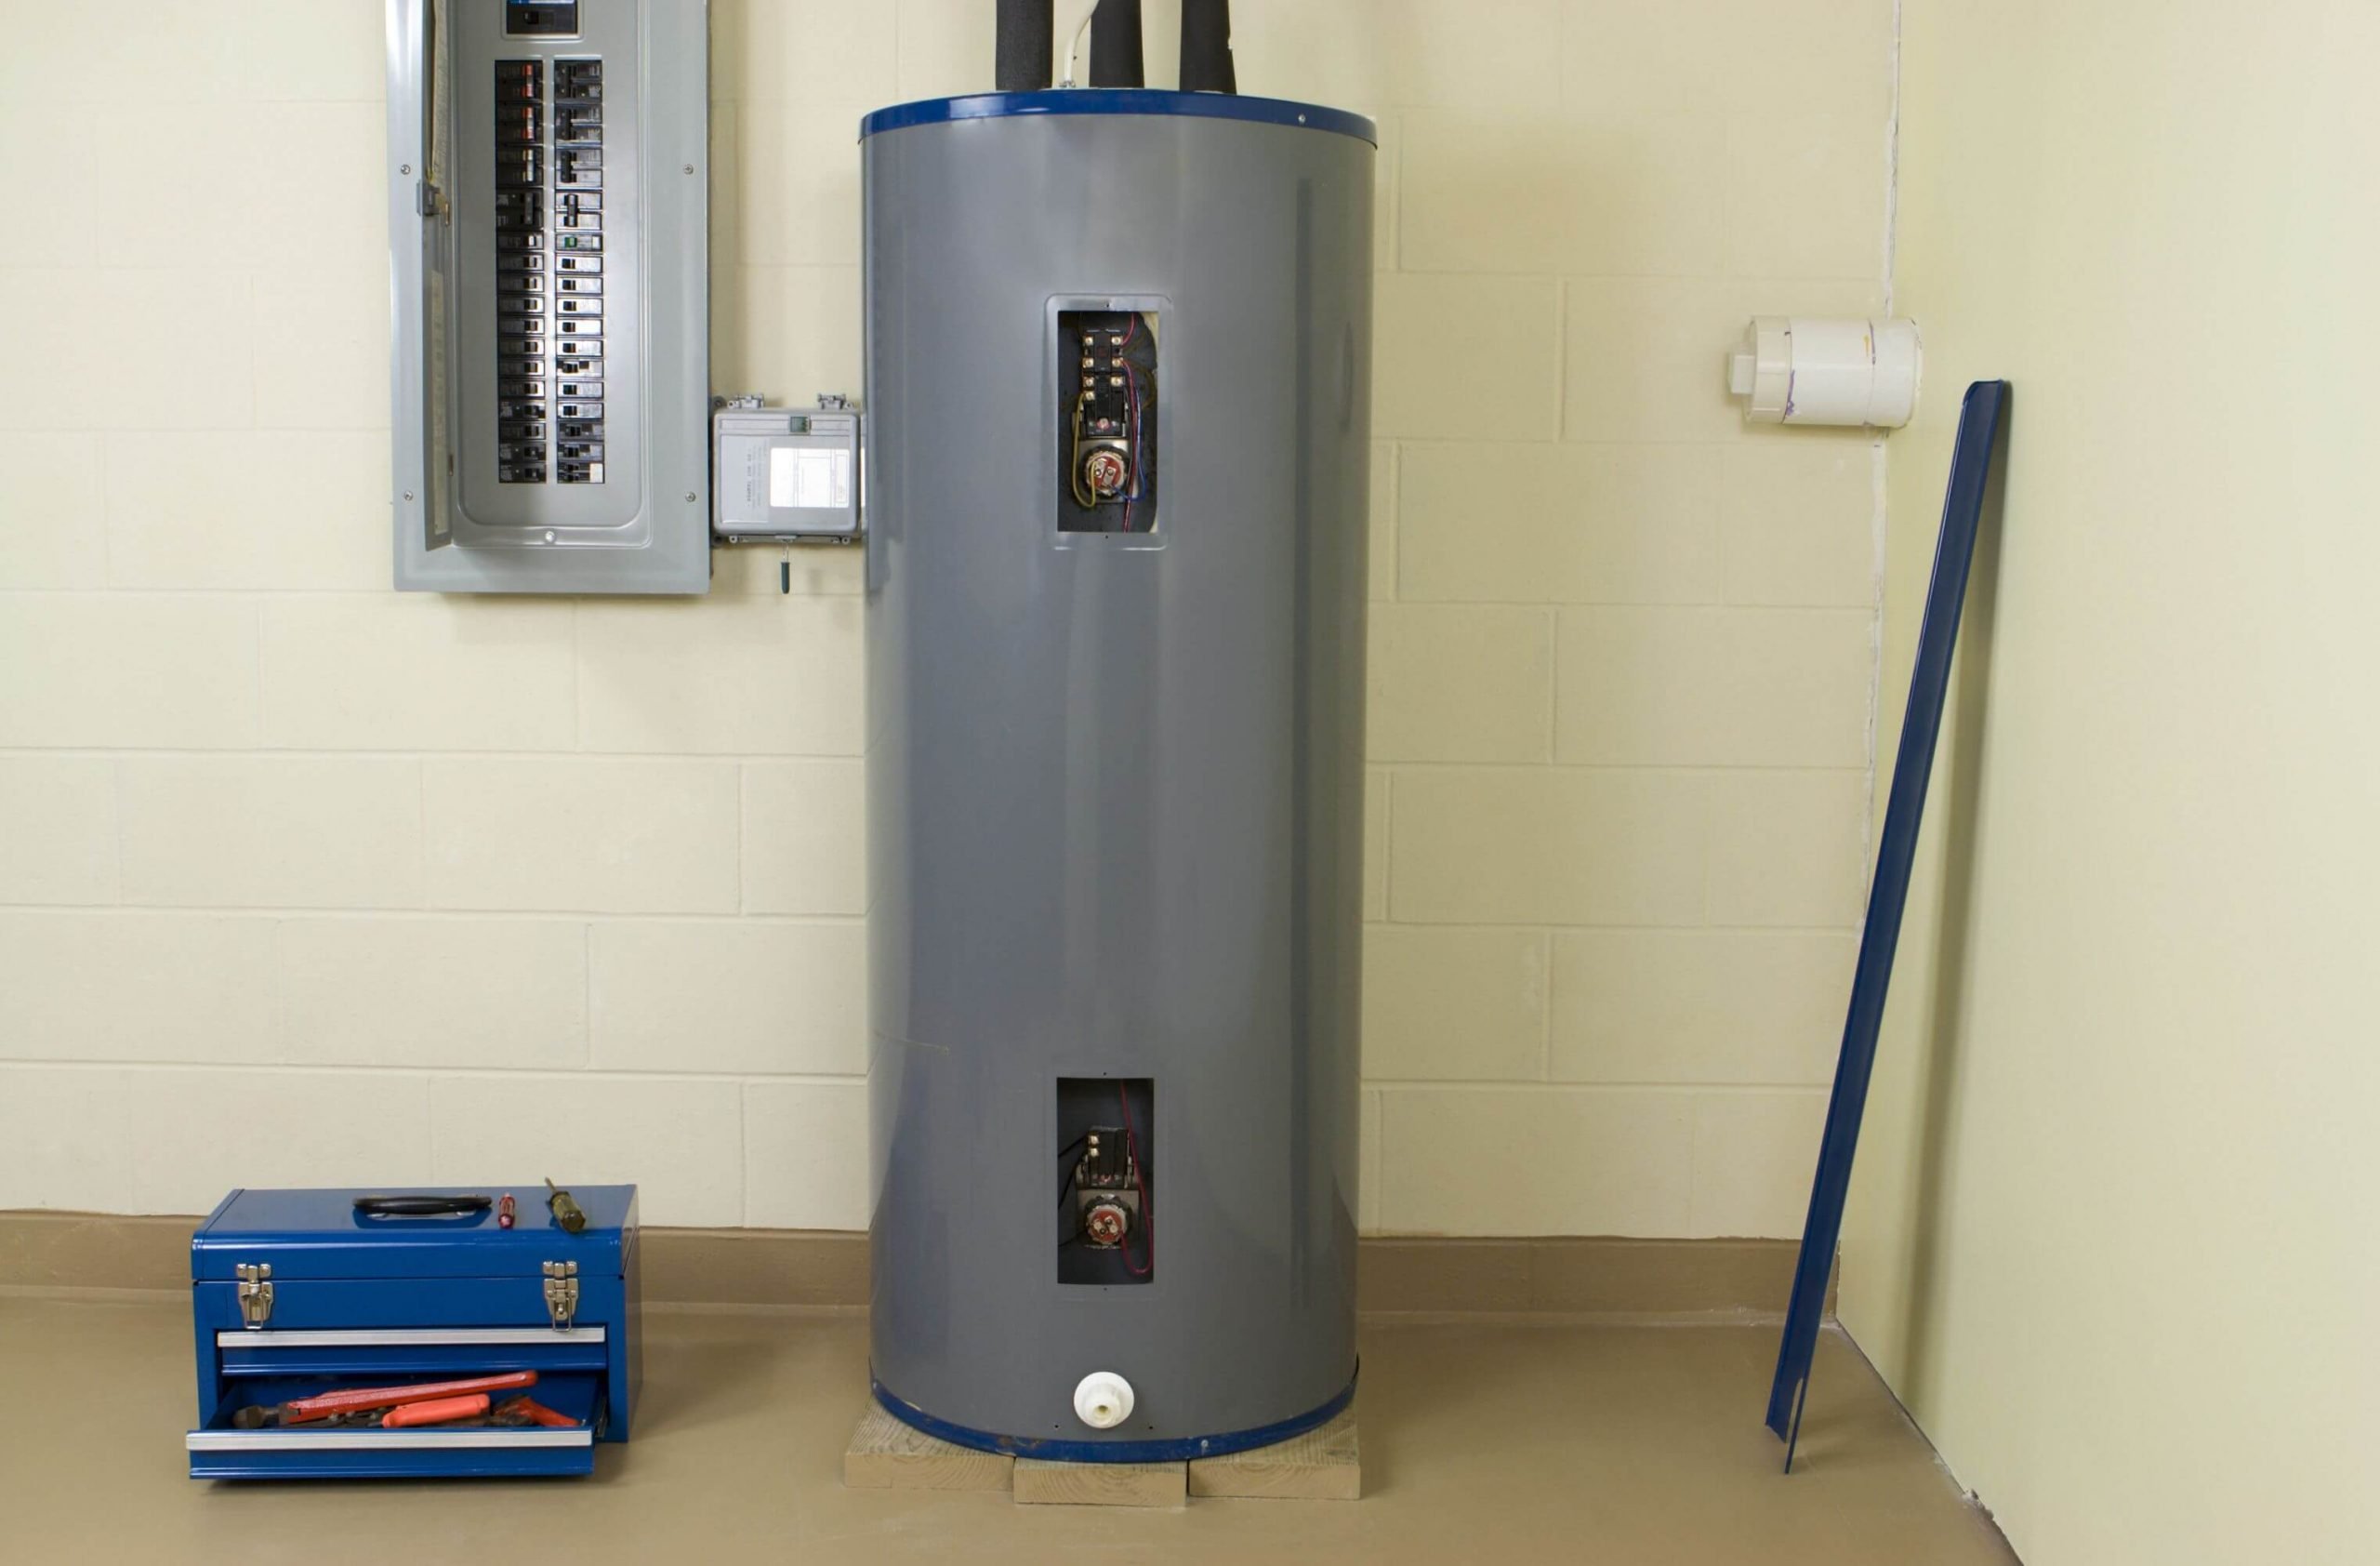 Clean-Up Any Mess, and Contact Insurance When Water Heater Breaks